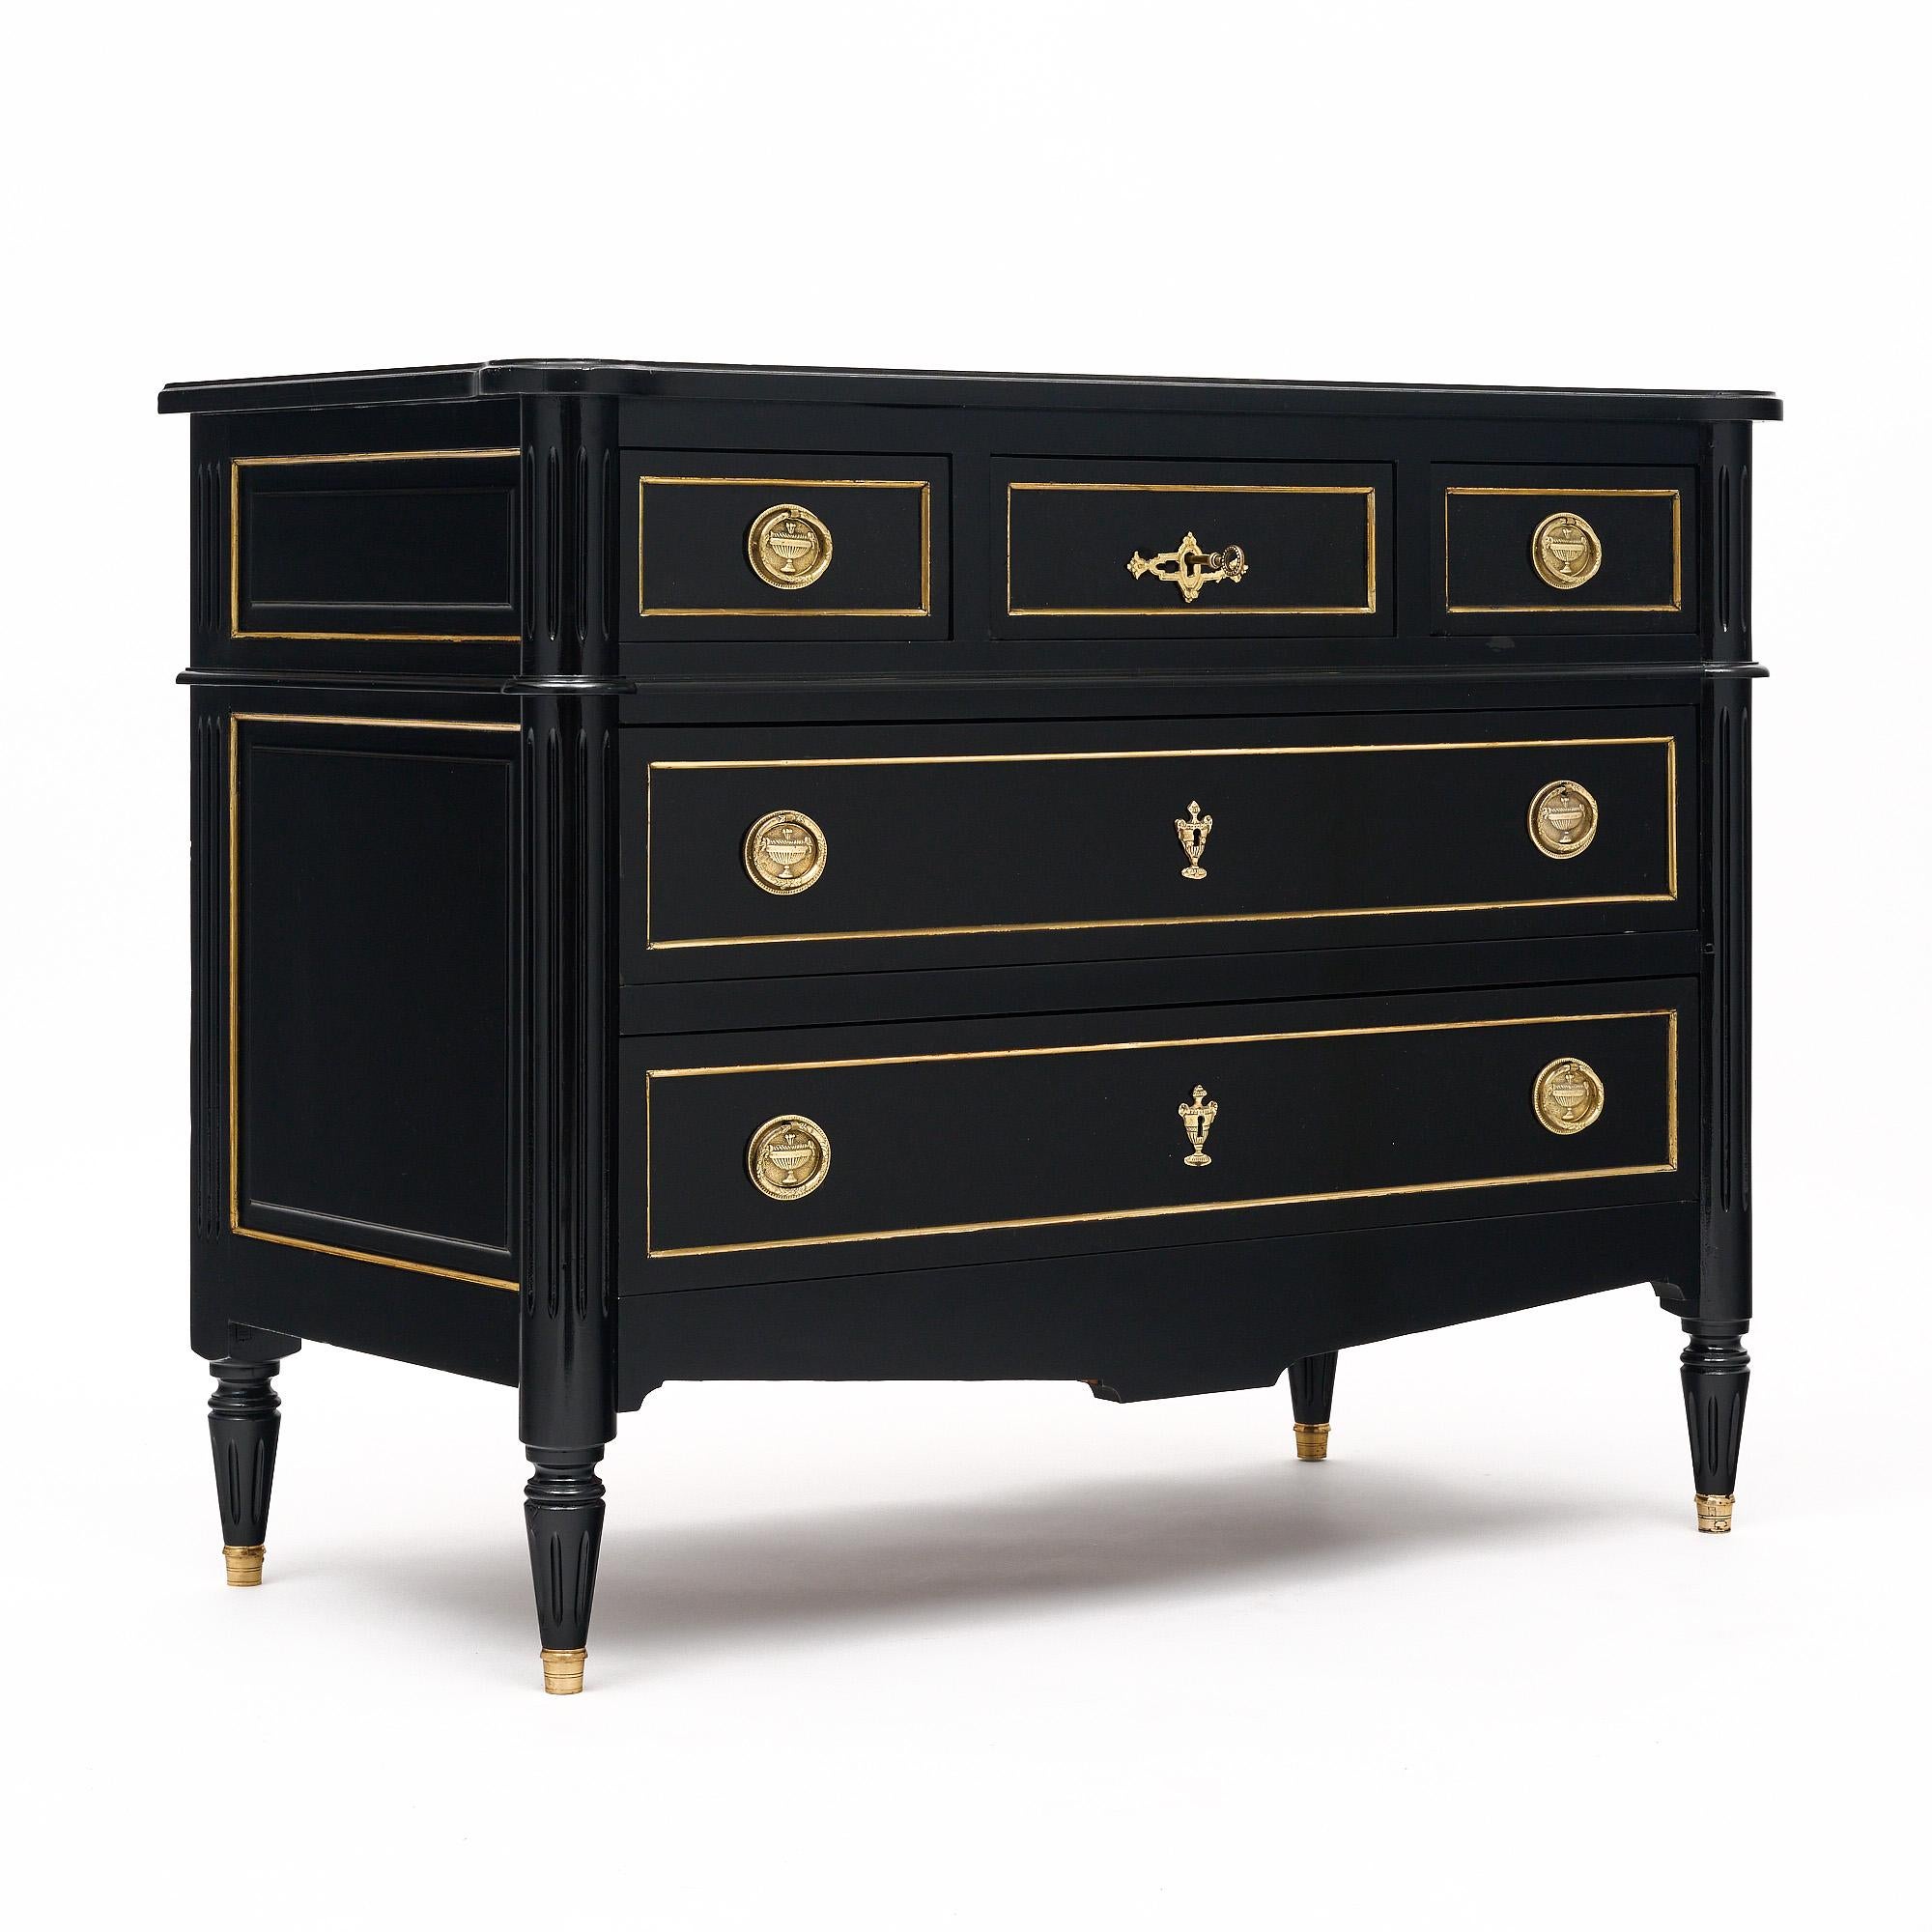 Chest of drawer from France in the Louis XVI style made of mahogany. This case piece has three small dovetailed drawers above two long dovetailed drawers. Gilt brass pulls and trims are found throughout. The top, middle drawer has a working lock and